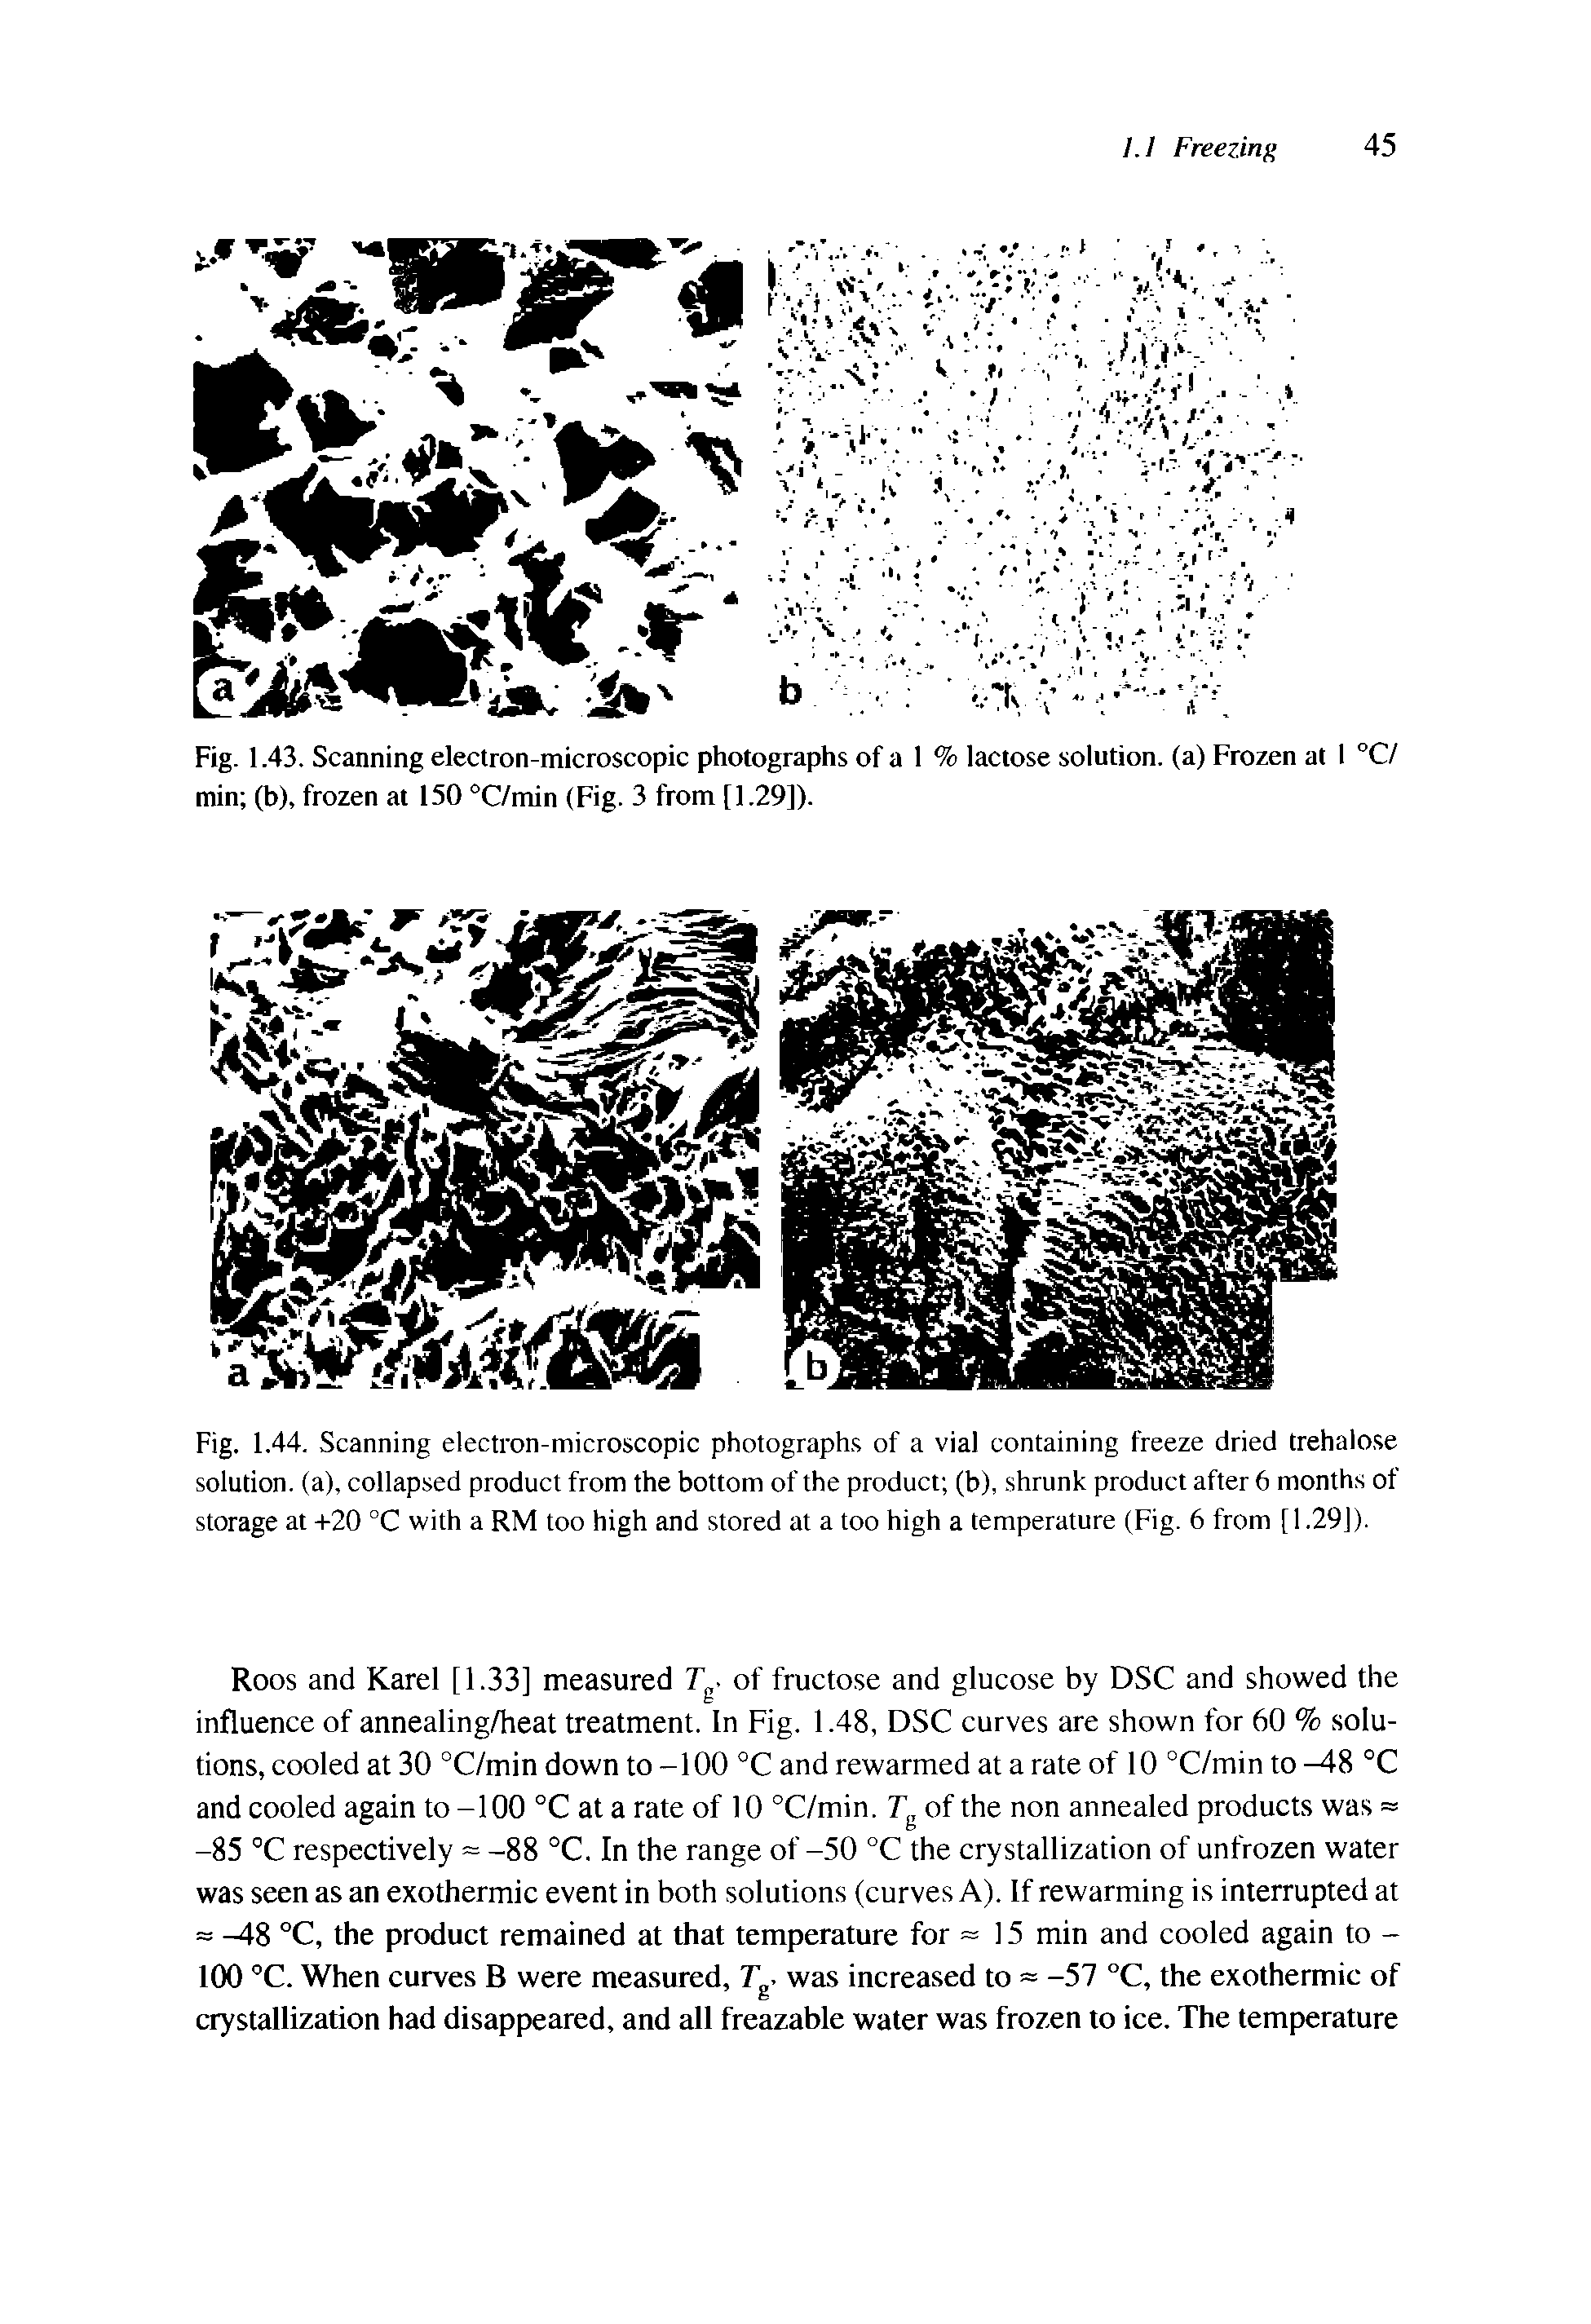 Fig. 1.44. Scanning electron-microscopic photographs of a vial containing freeze dried trehalose solution, (a), collapsed product from the bottom of the product (b), shrunk product after 6 months of storage at +20 °C with a RM too high and stored at a too high a temperature (Fig. 6 from [ 1.29]).